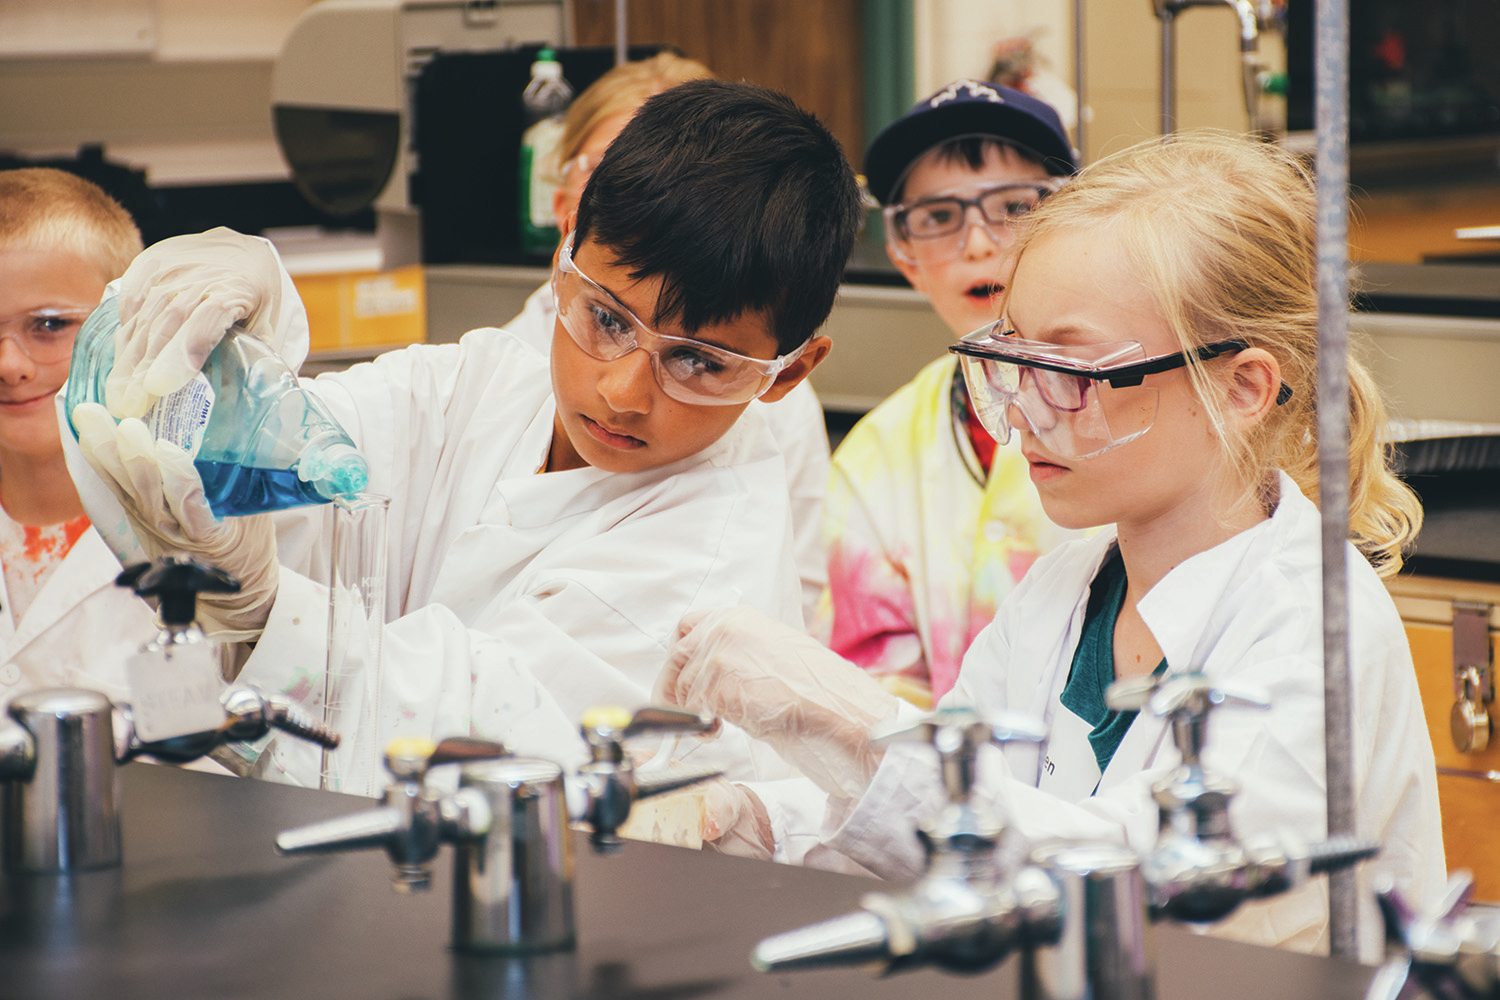 CONCENTRATION - Campers watch carefully as they measure out ingredients for their science experiment at Red Deer College’s Summer Camp program earlier this week.